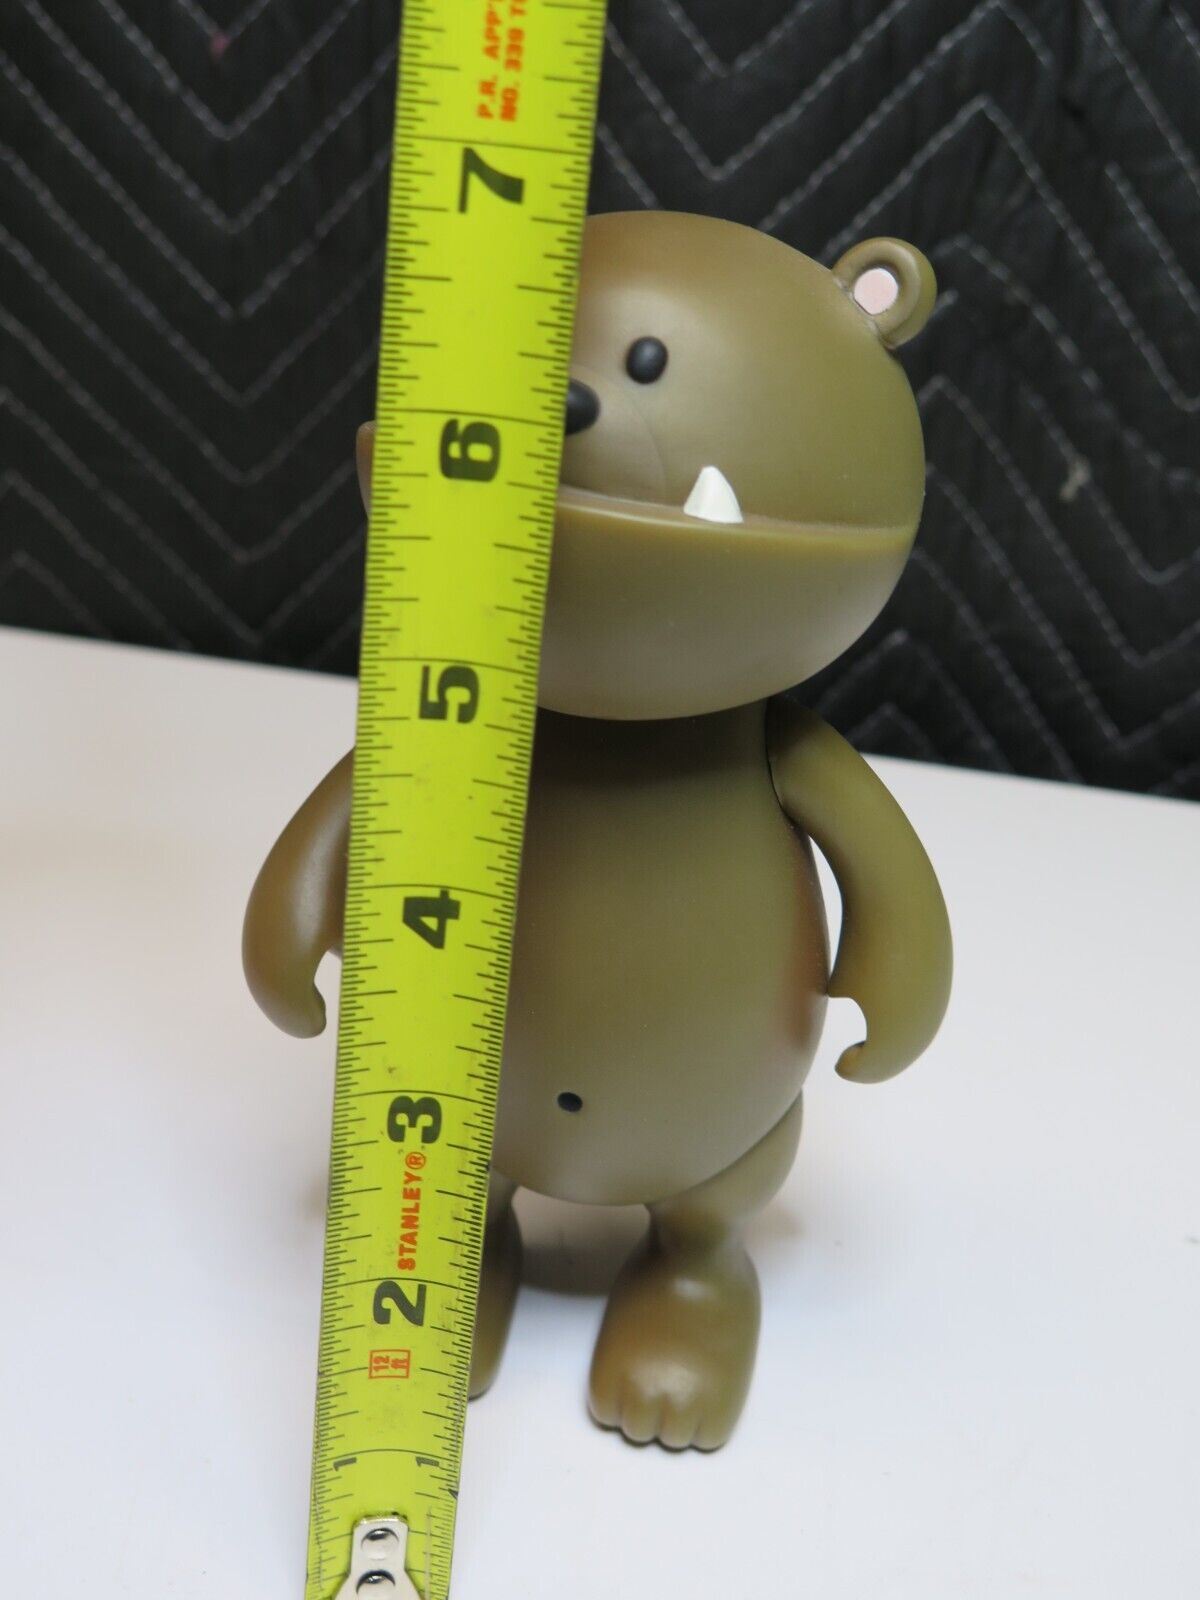 TITUS THE GRIZZLY - ROCKETWORLD  I.W.G. LIMITED EDITION NUMBER 370